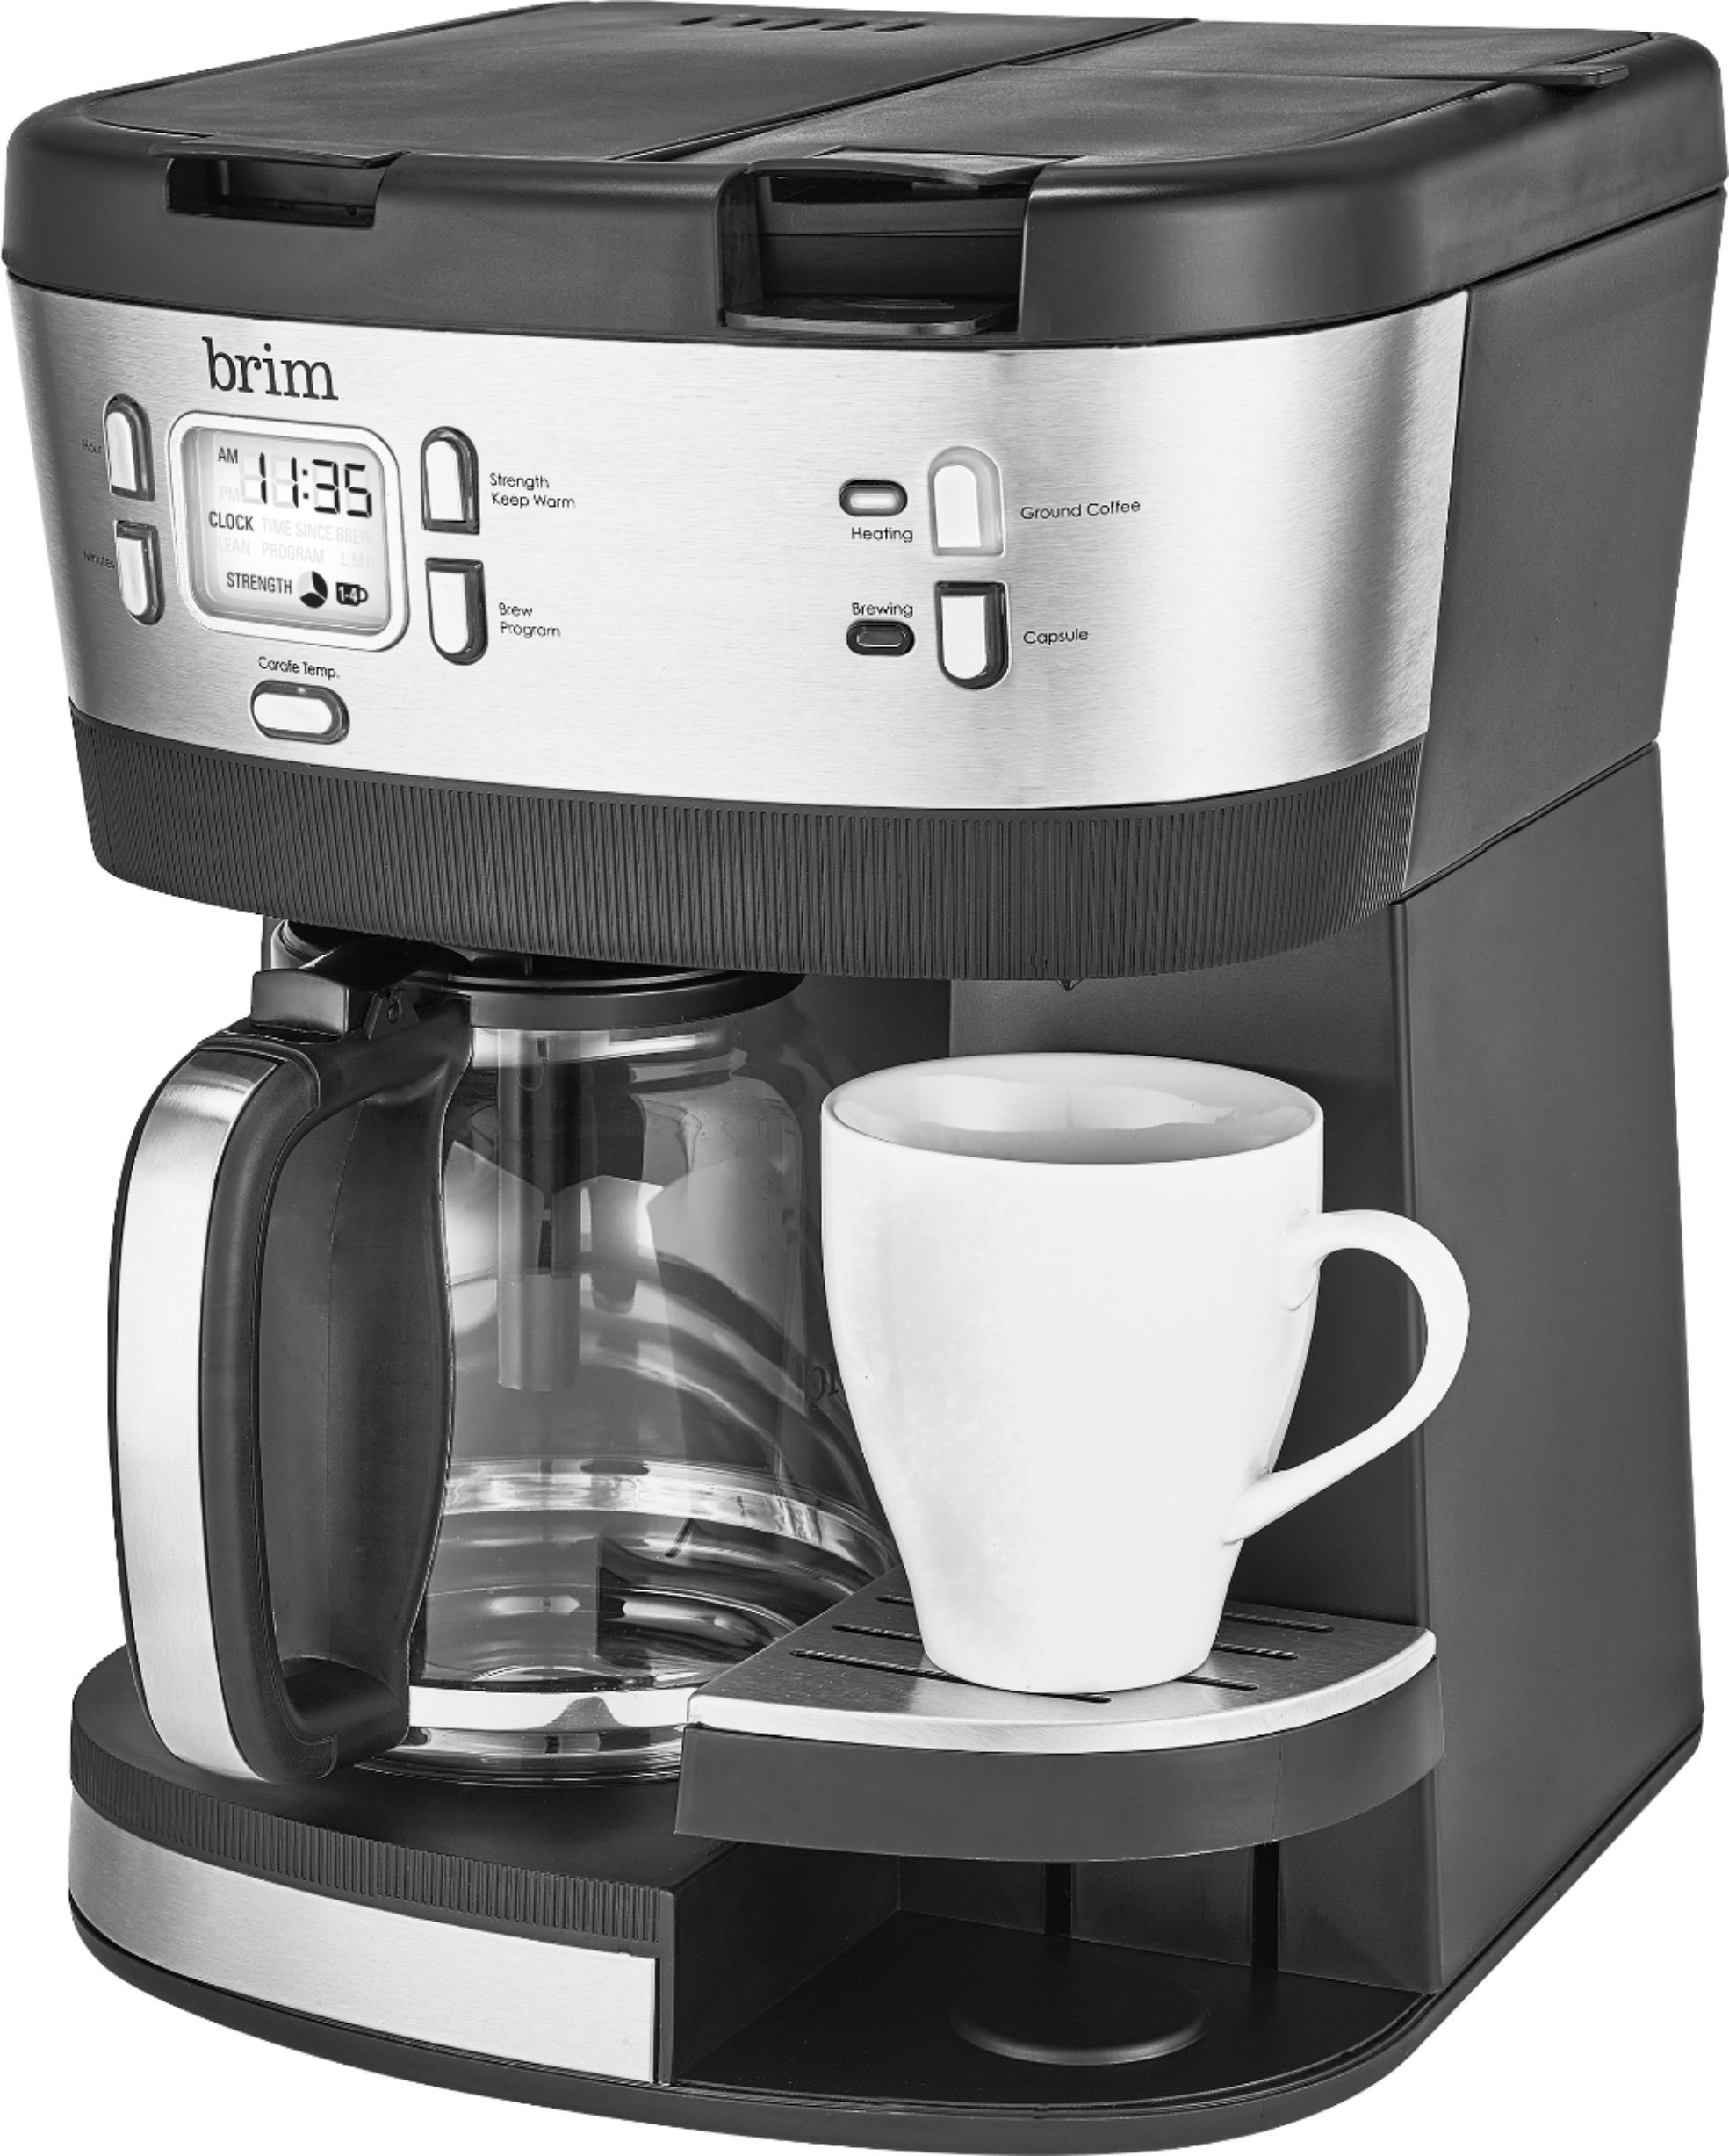 Brim Coffee Maker Review - Is It Good Quality?